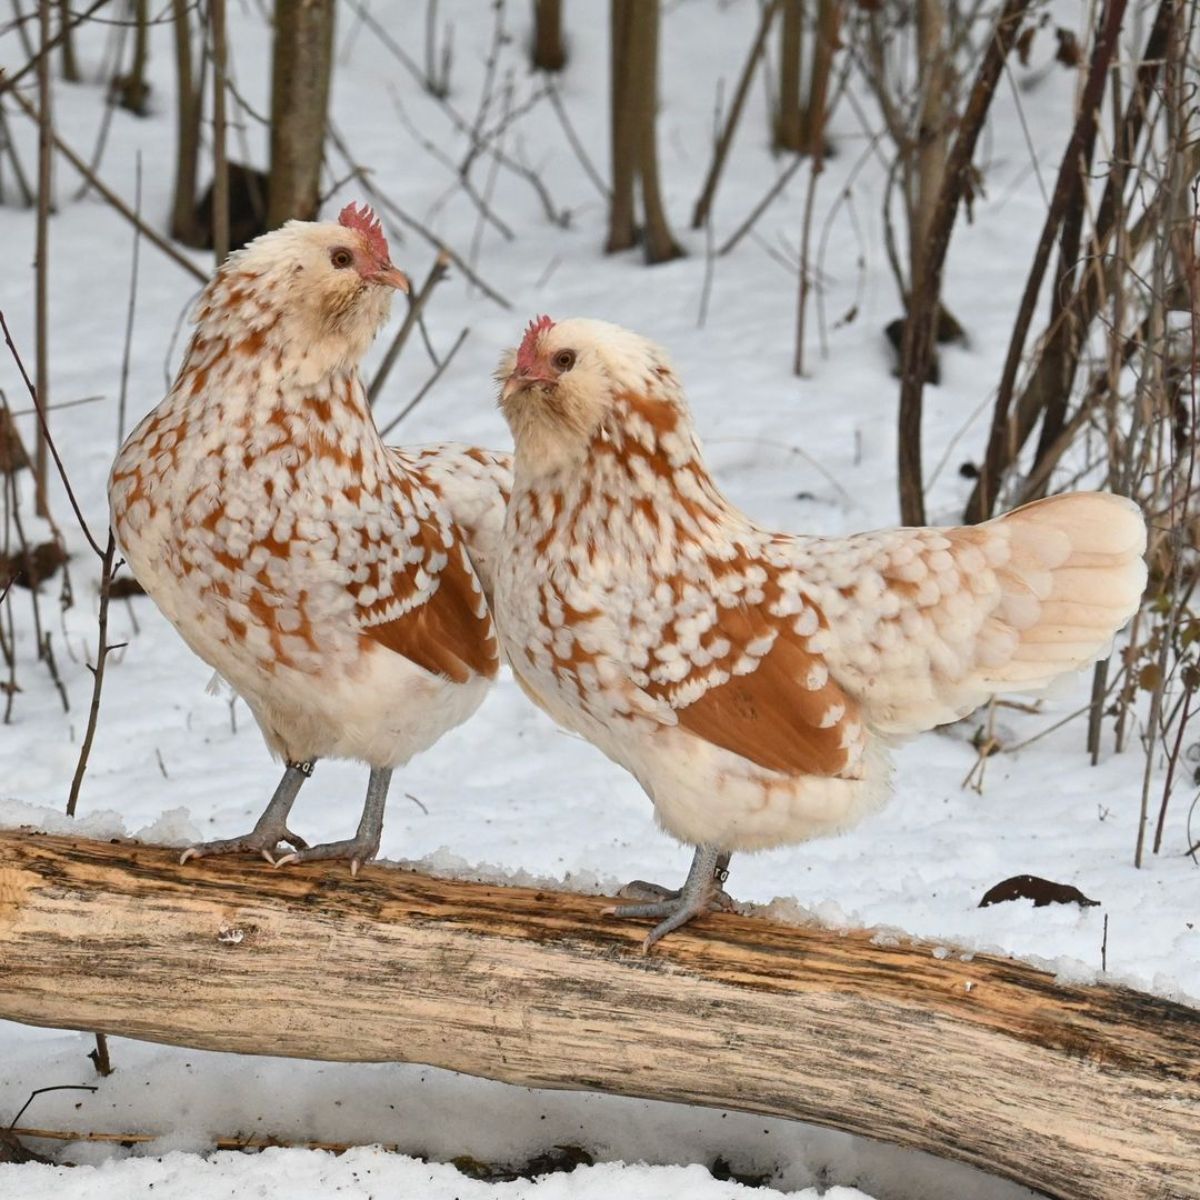 Two adorable speckled Thüringian hens perched on a wooden log.